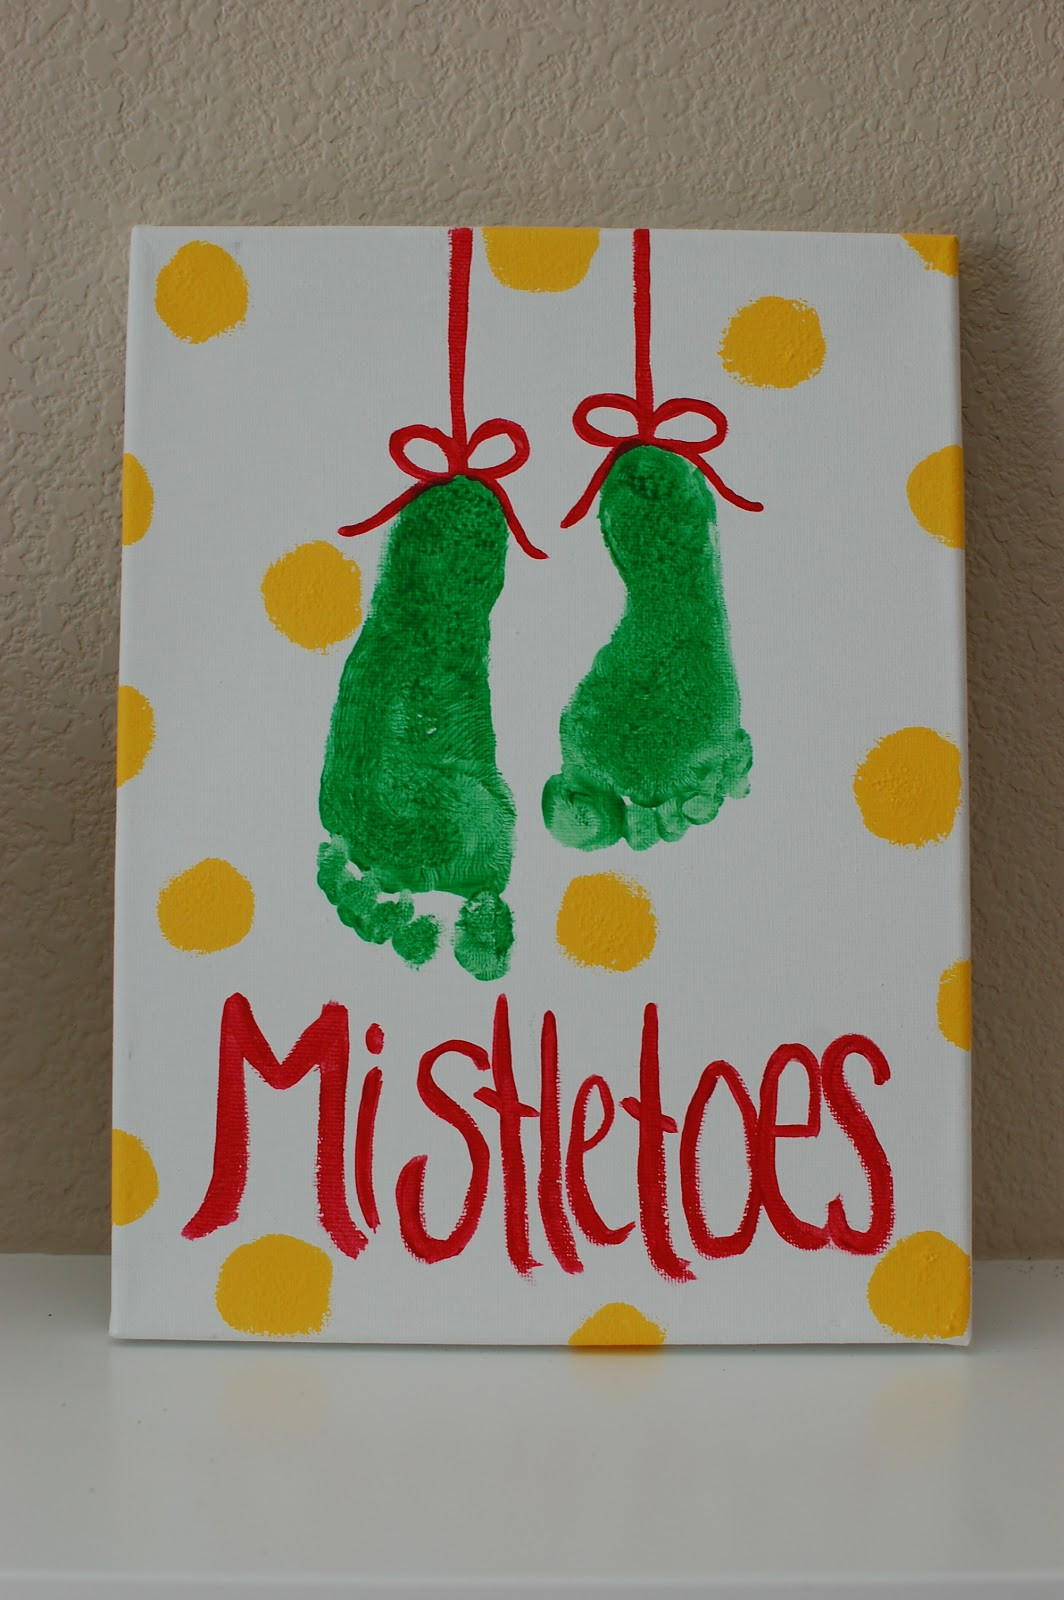 Child Christmas Craft Ideas
 12 Days of Christmas Crafts for Kids